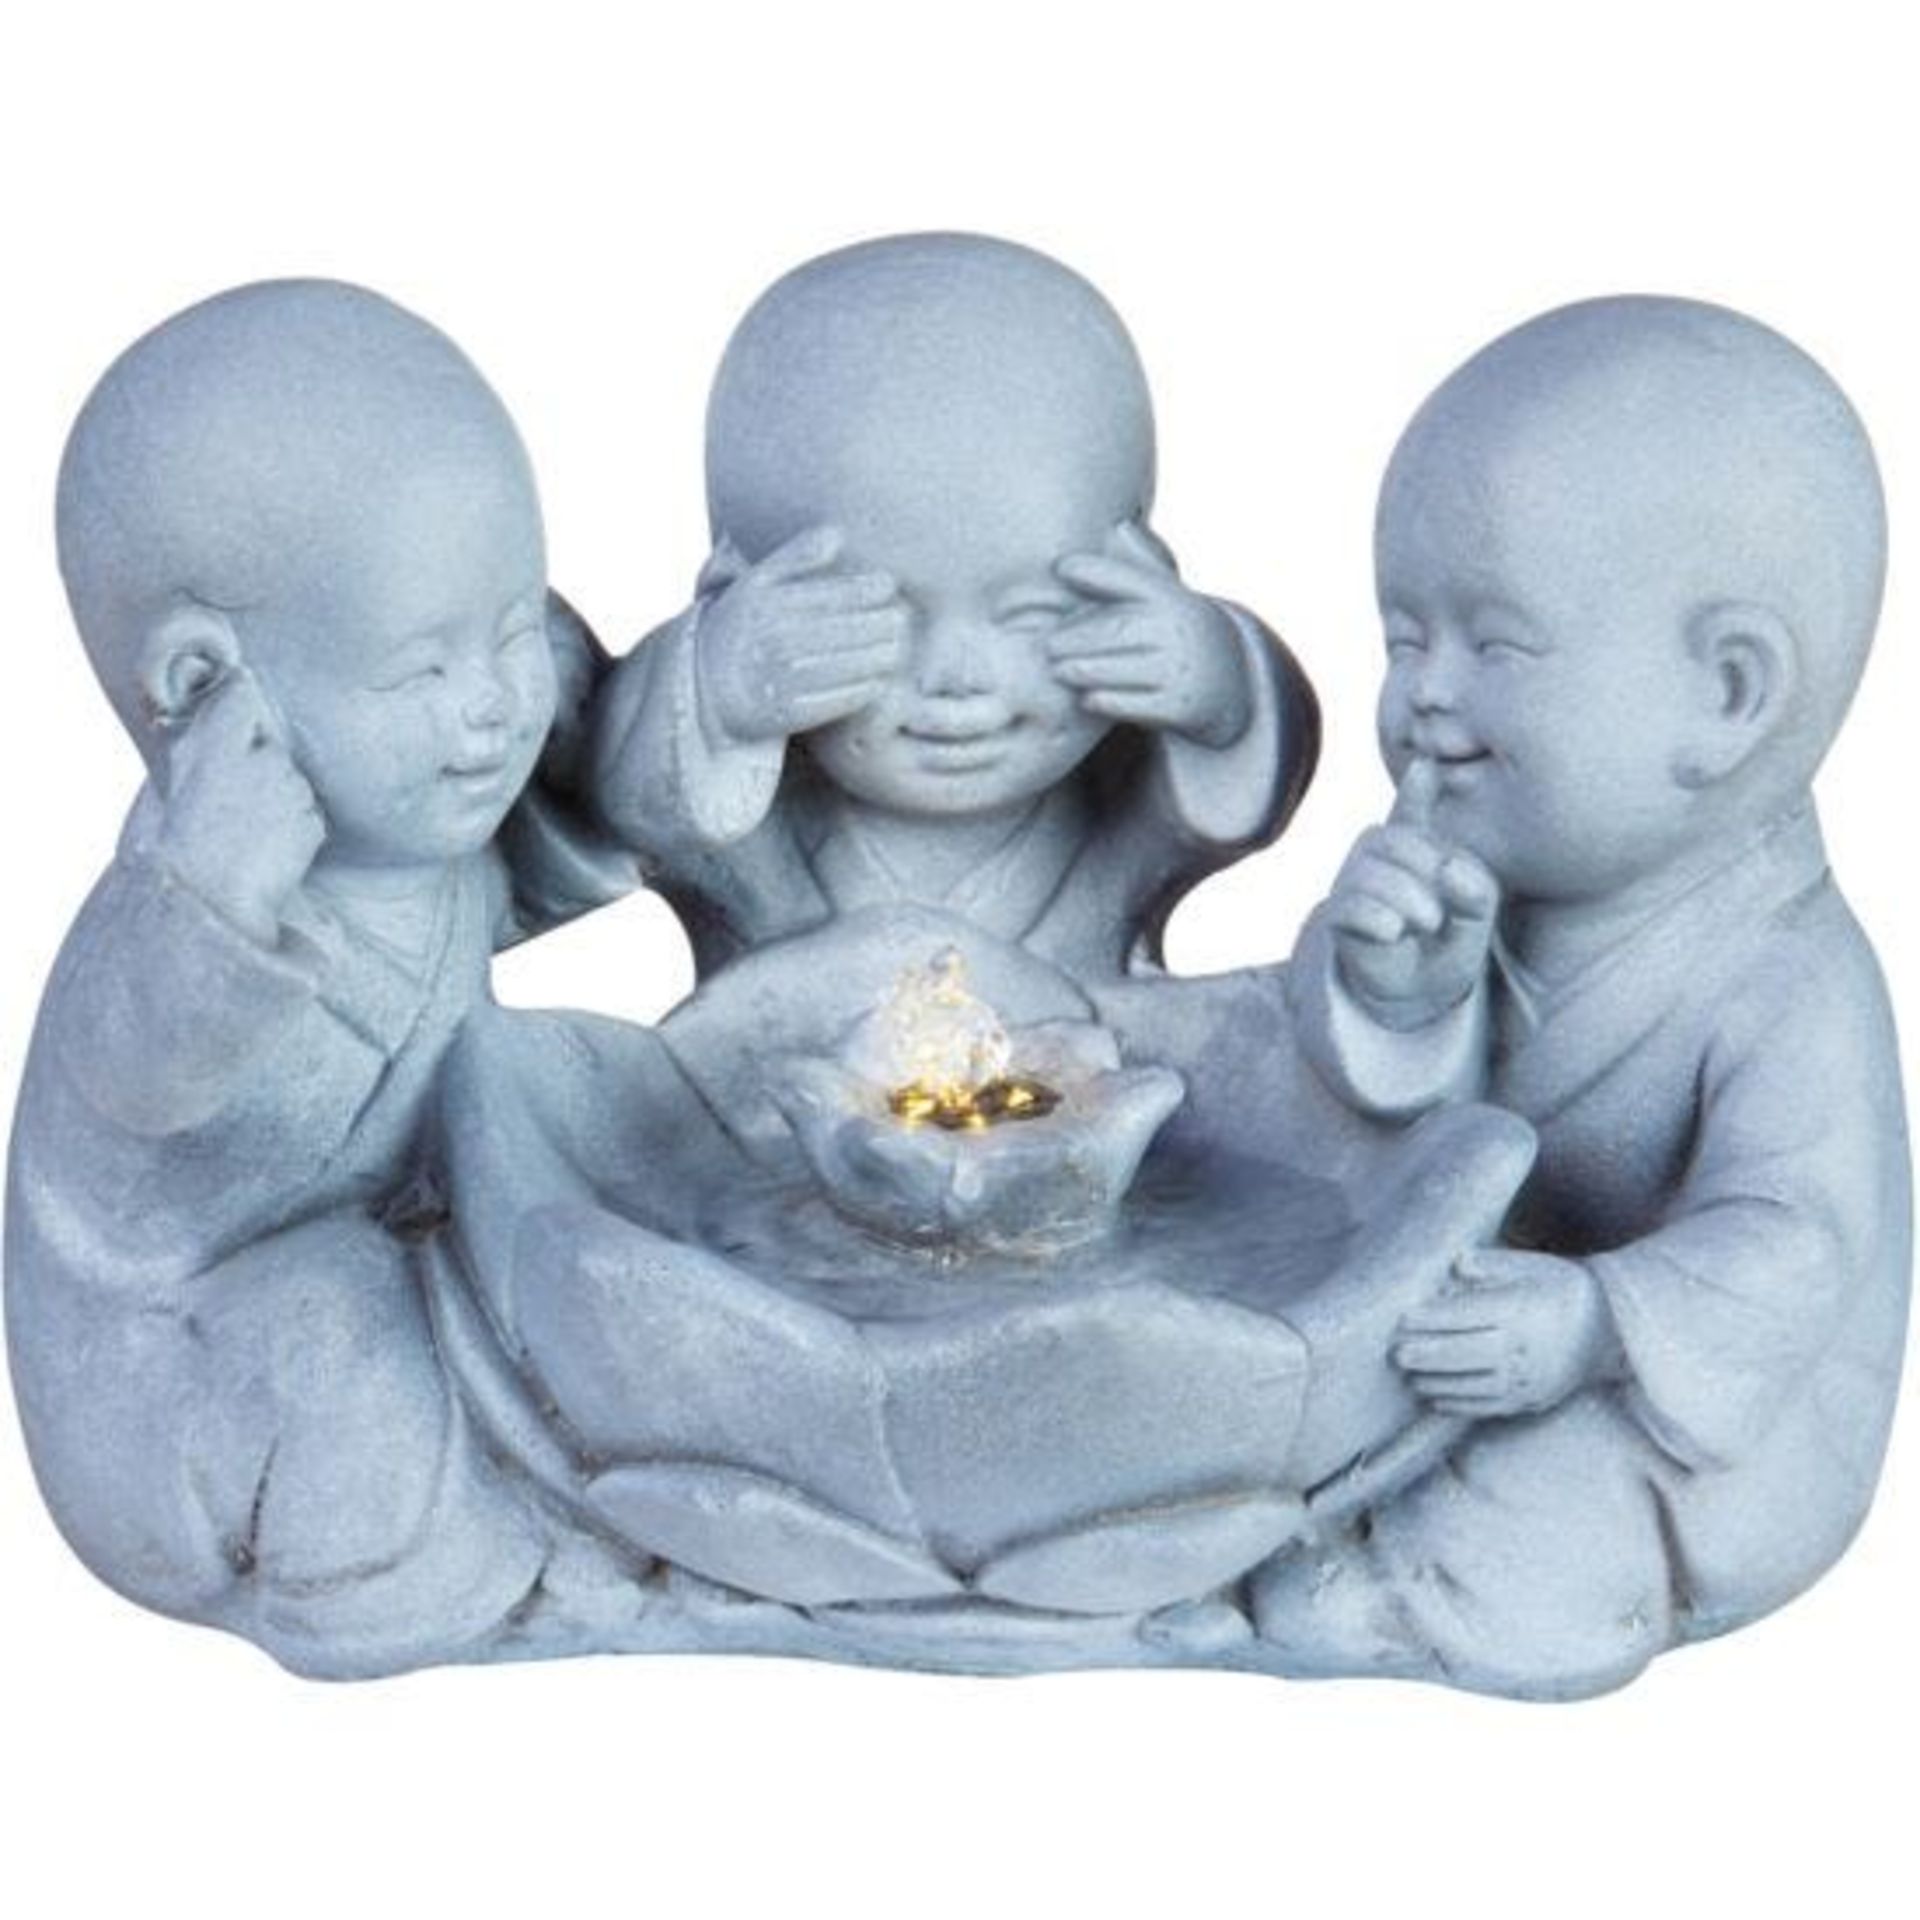 BRAND NEW! 3 MONKS WATER FEATURE 42X25X28CM - SPEAK, SEE AND HEAR NO EVIL